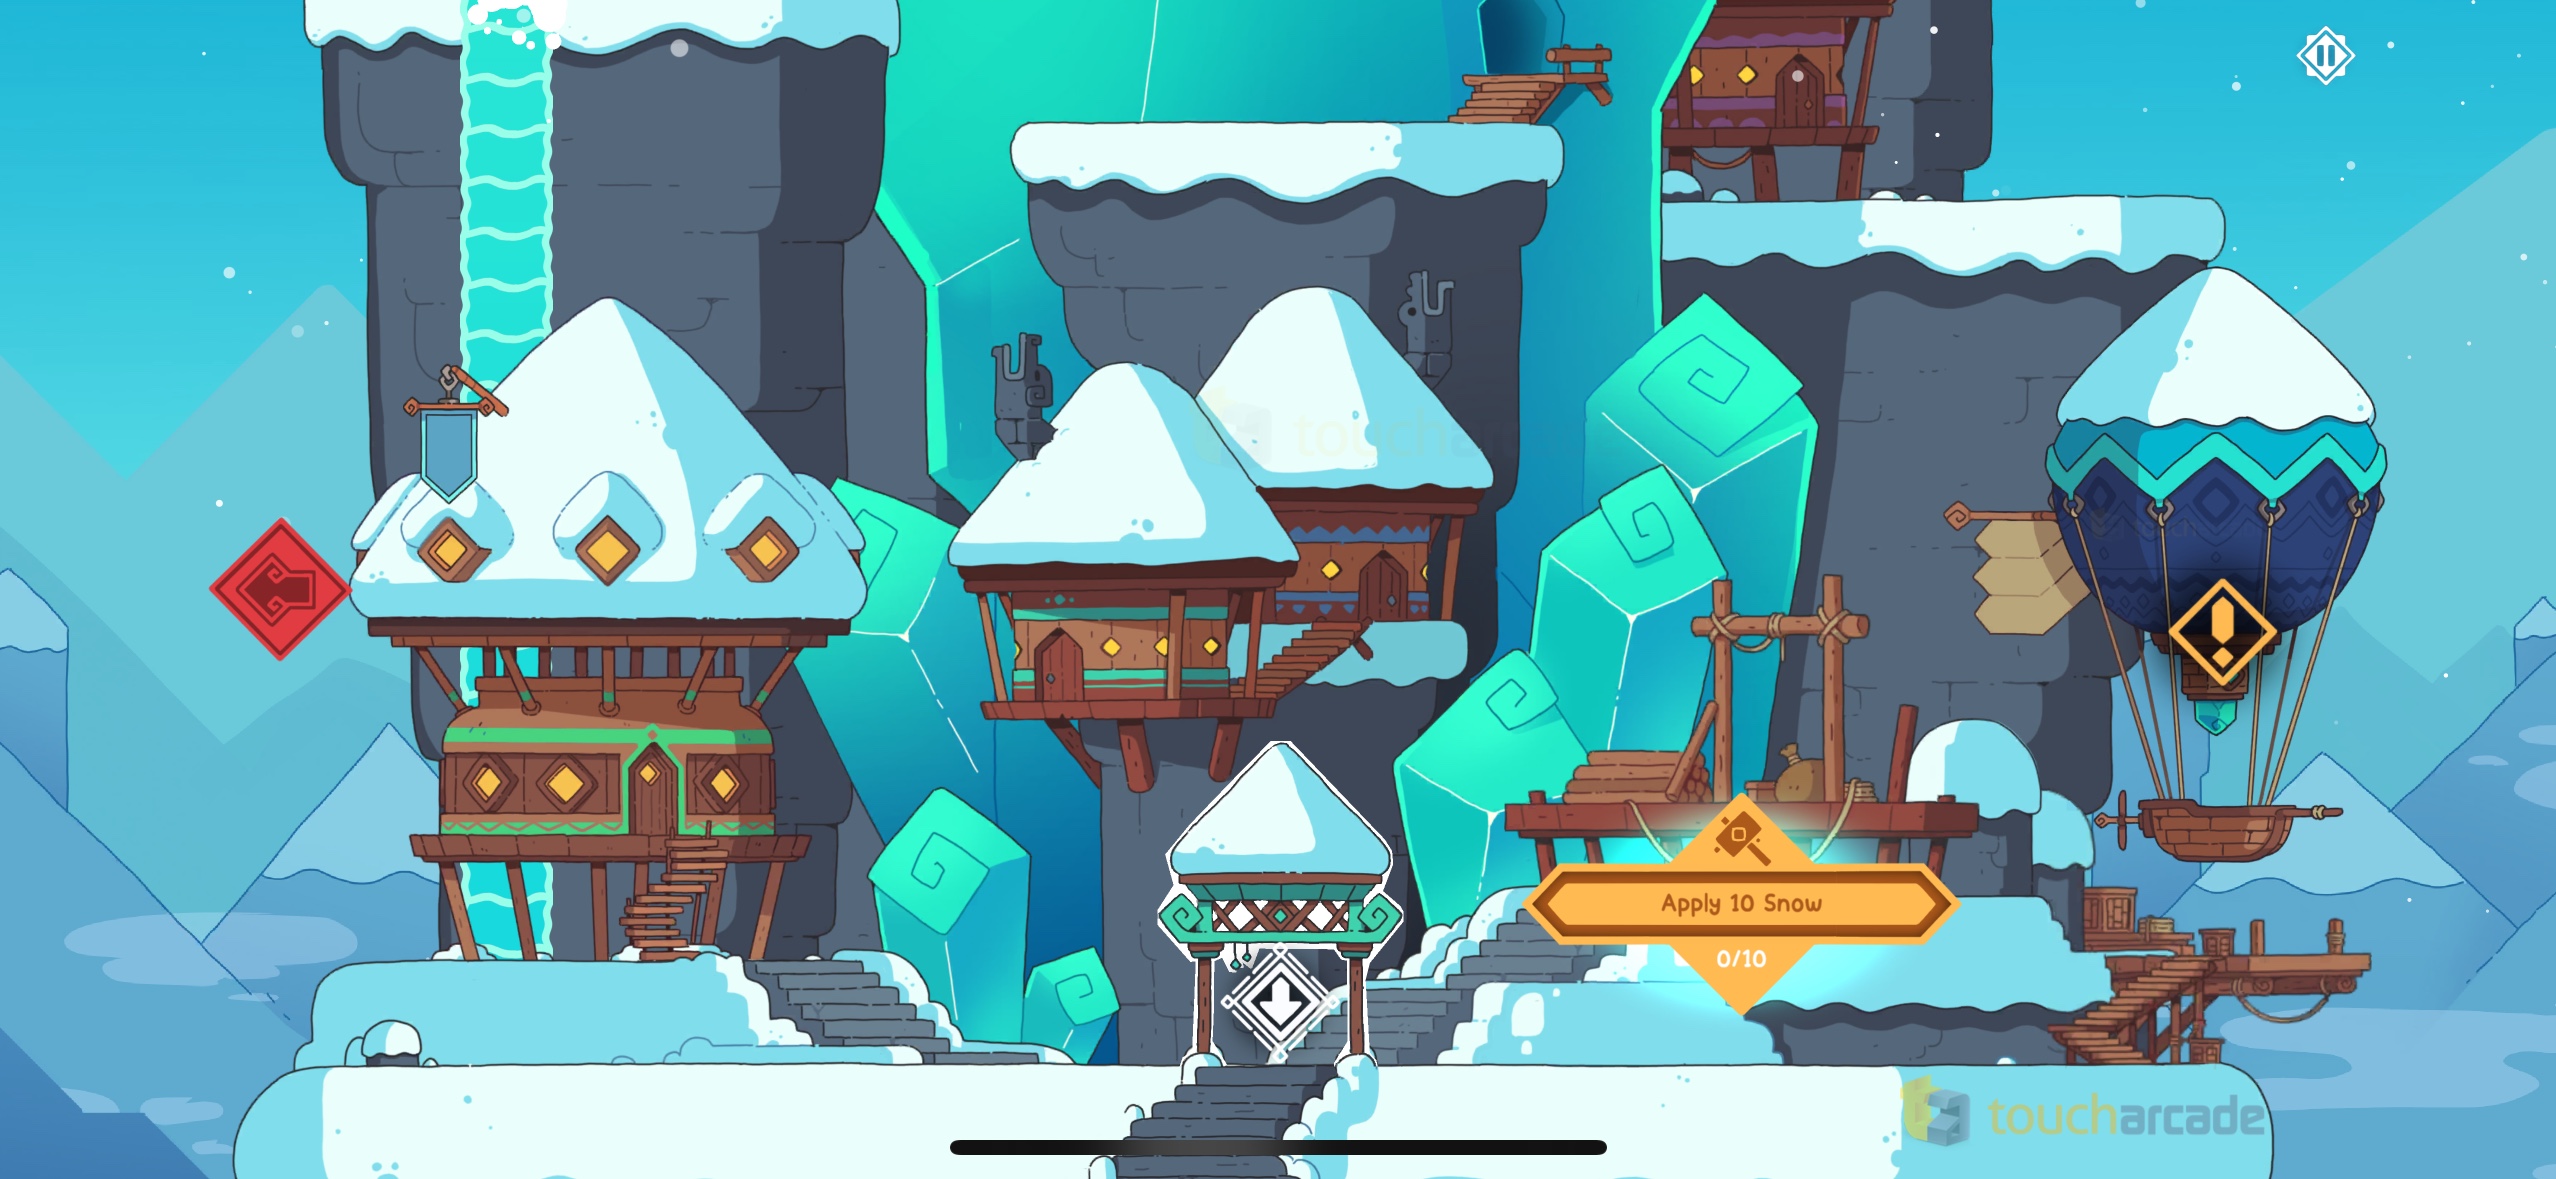 wildfrost-iphone-review-2.jpg